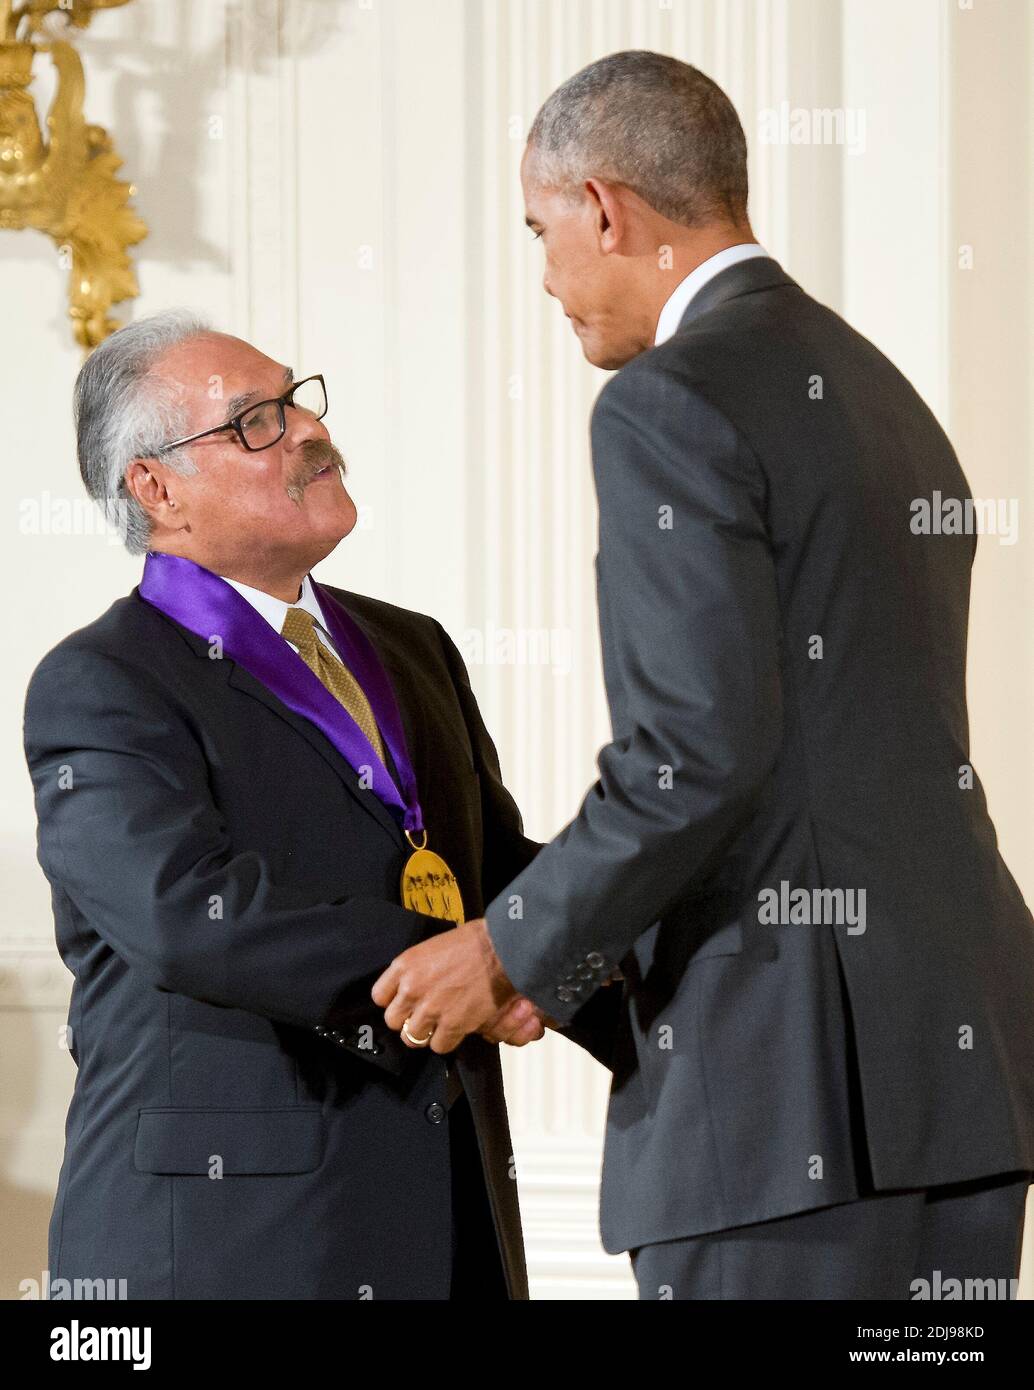 United States President Barack Obama presents the 2015 National Medal of Arts to Luis Valdez, Playwright, Actor, Writer, & Director of San Juan Bautista, California, during a ceremony in the East Room of the White House in Washington, DC, USA, on Thursday, September 22, 2016. Photo by Ron Sachs/CNP/ABACAPRESS.COM Stock Photo